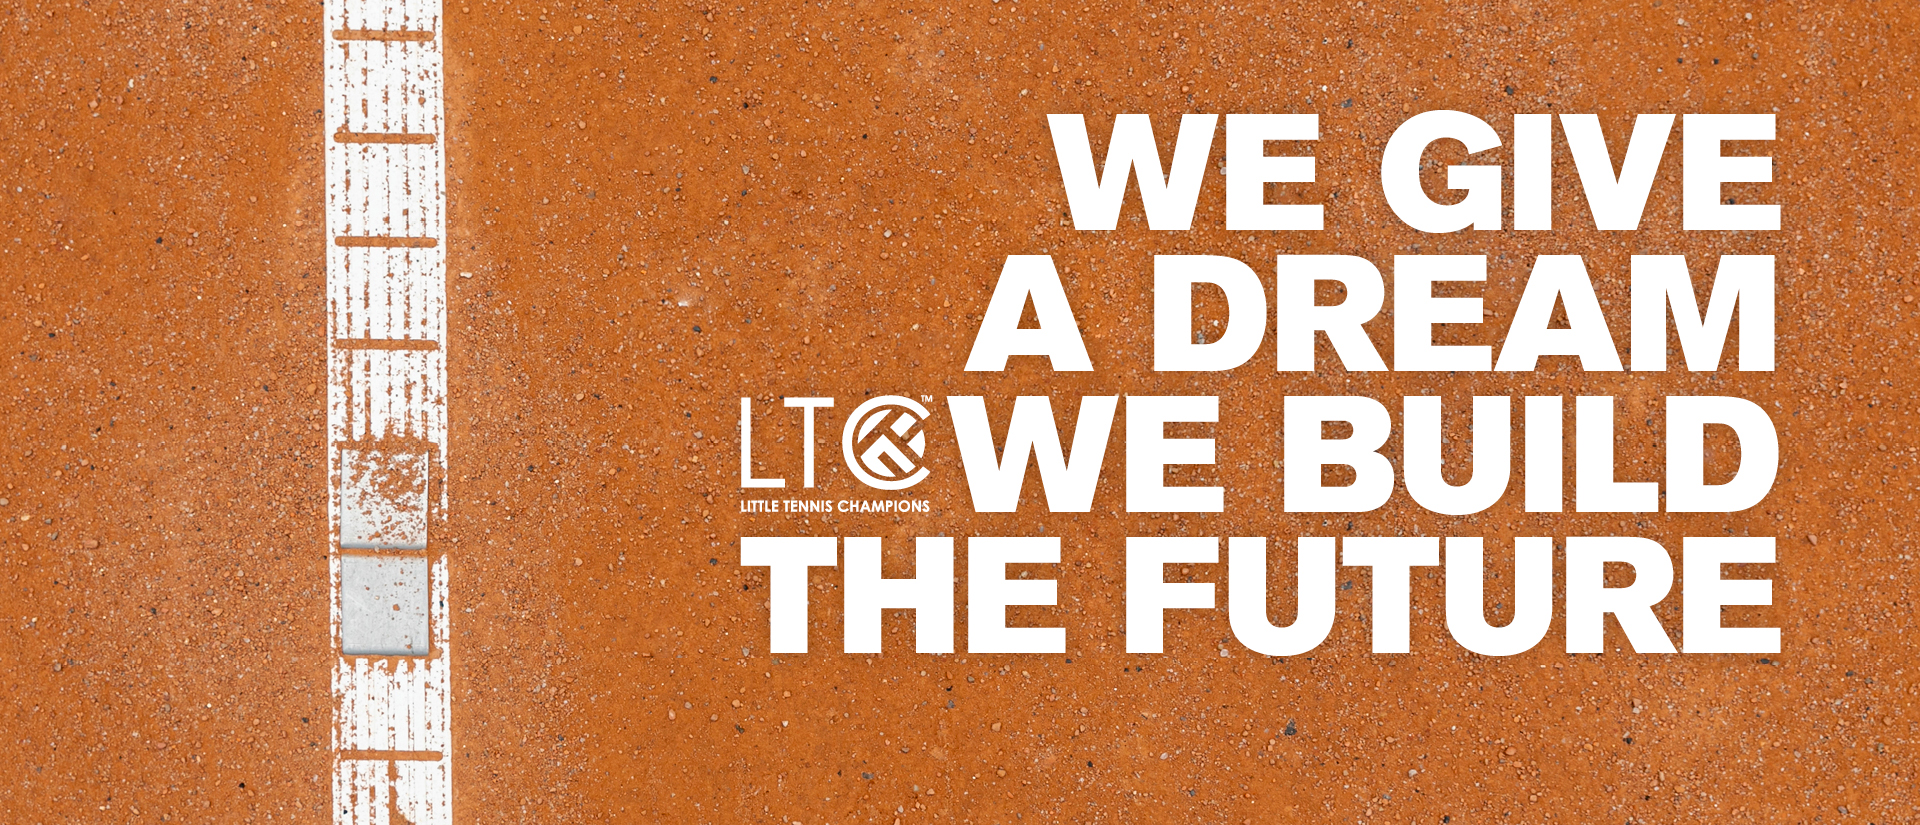 We give a dream we build the future